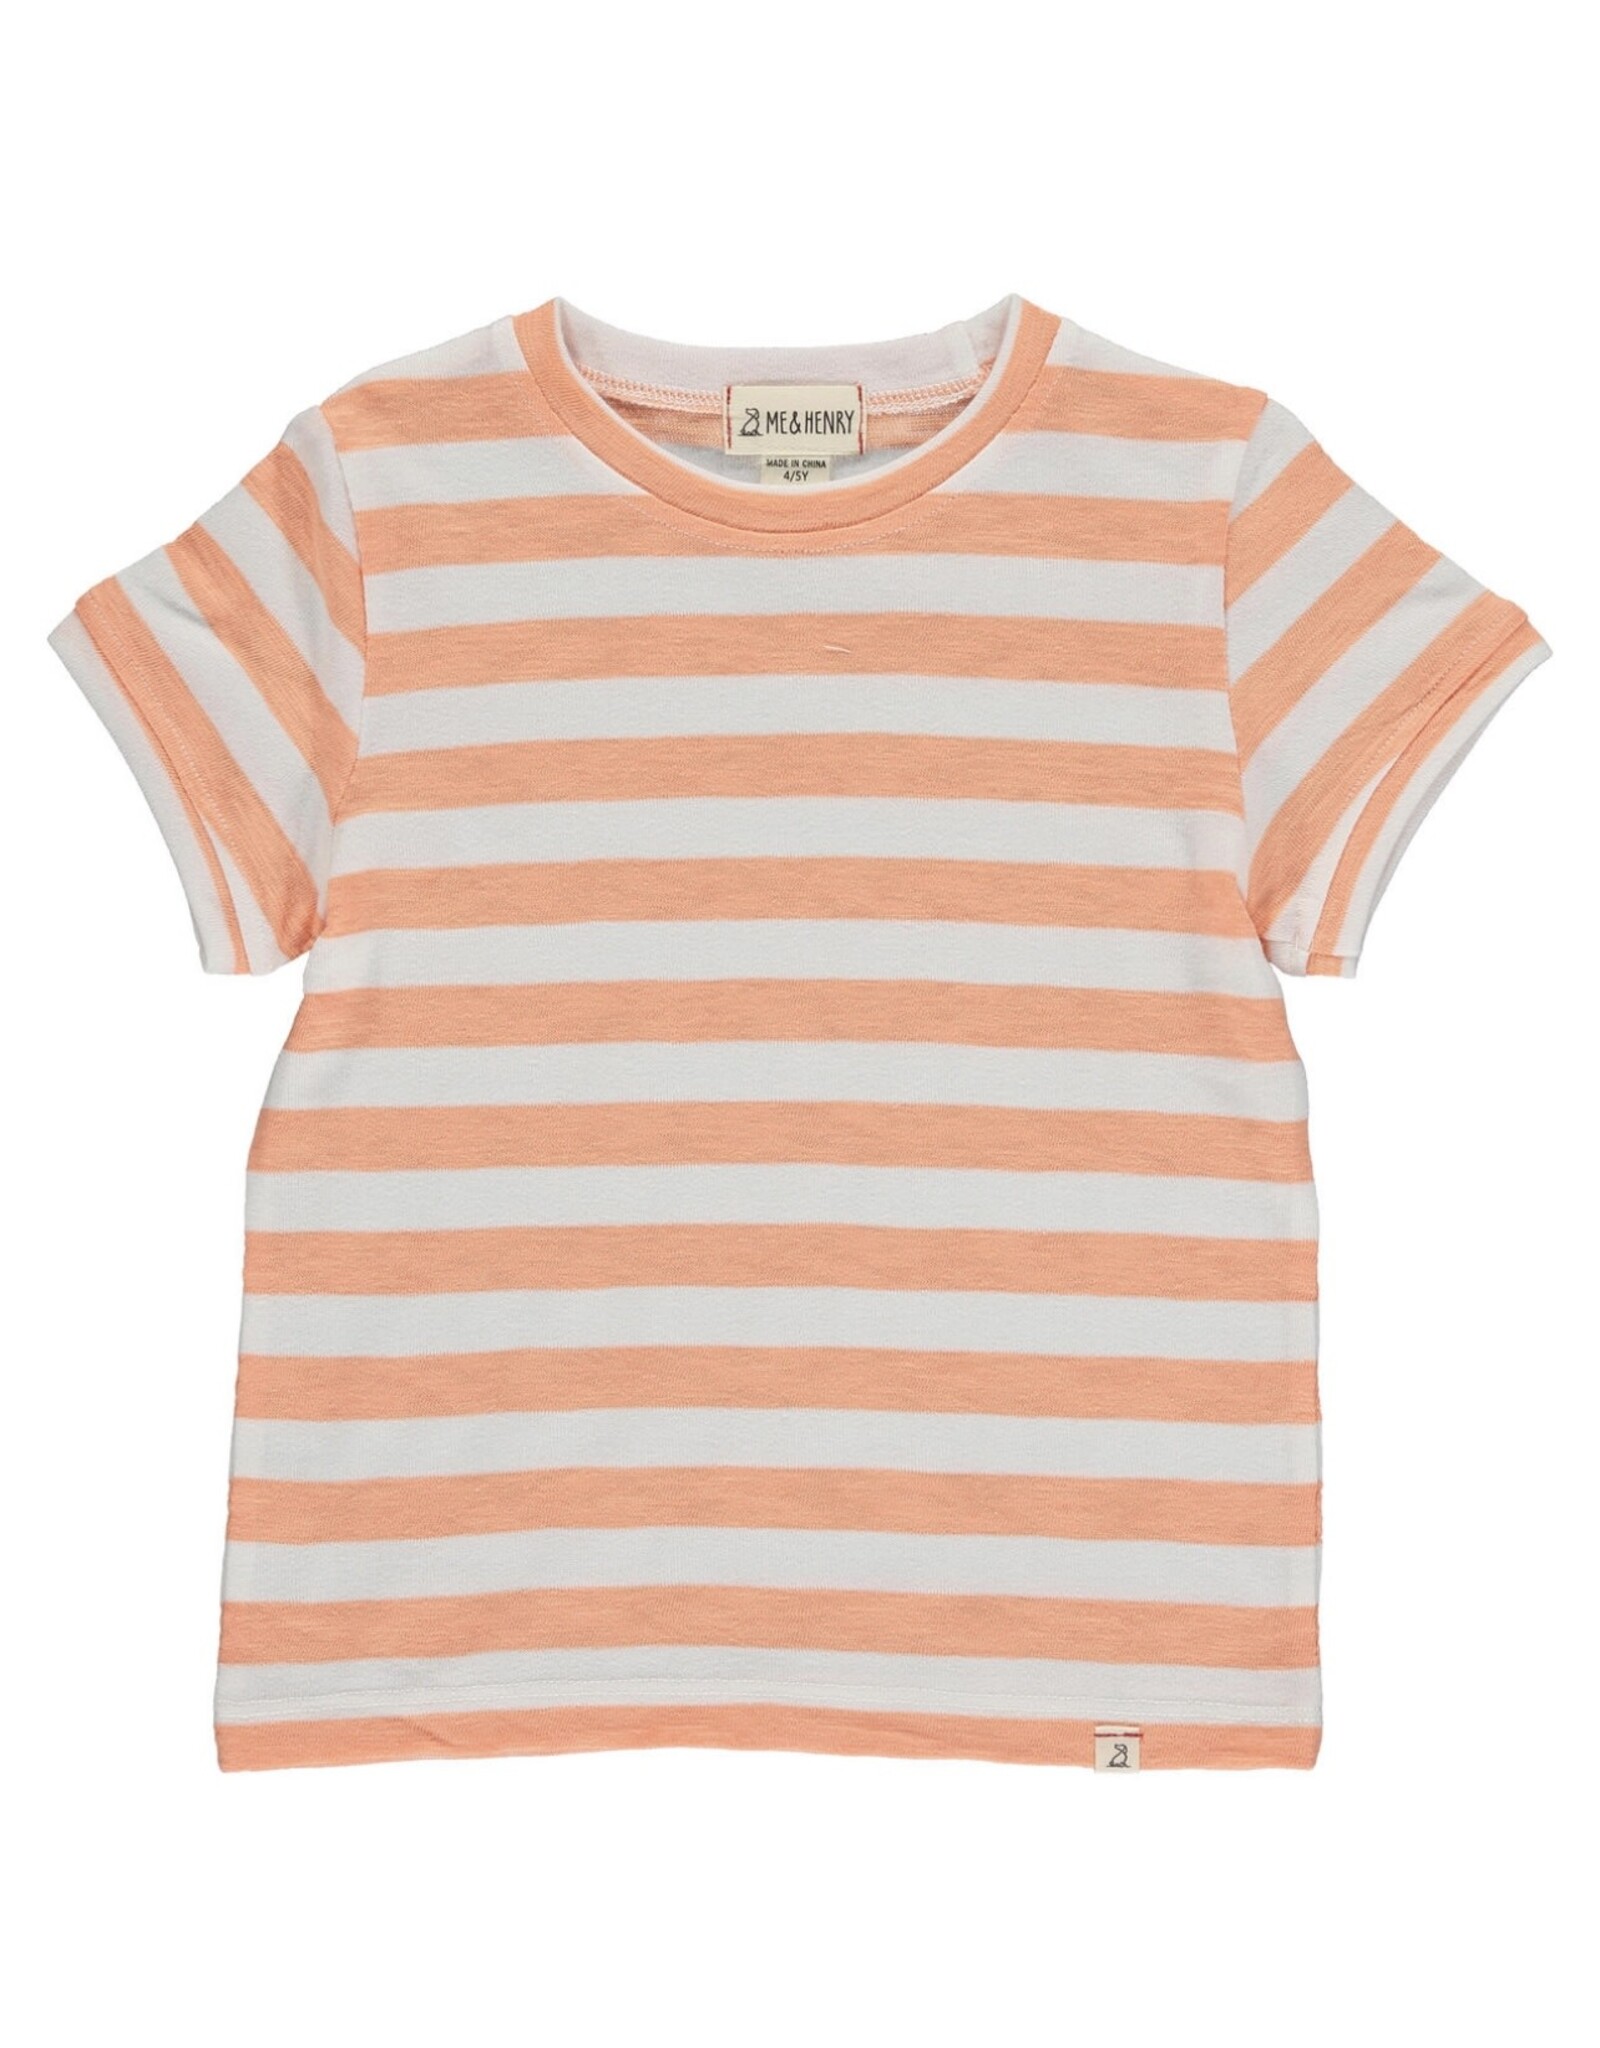 Me & Henry Me & Henry- Camber Tee: Apricot/White